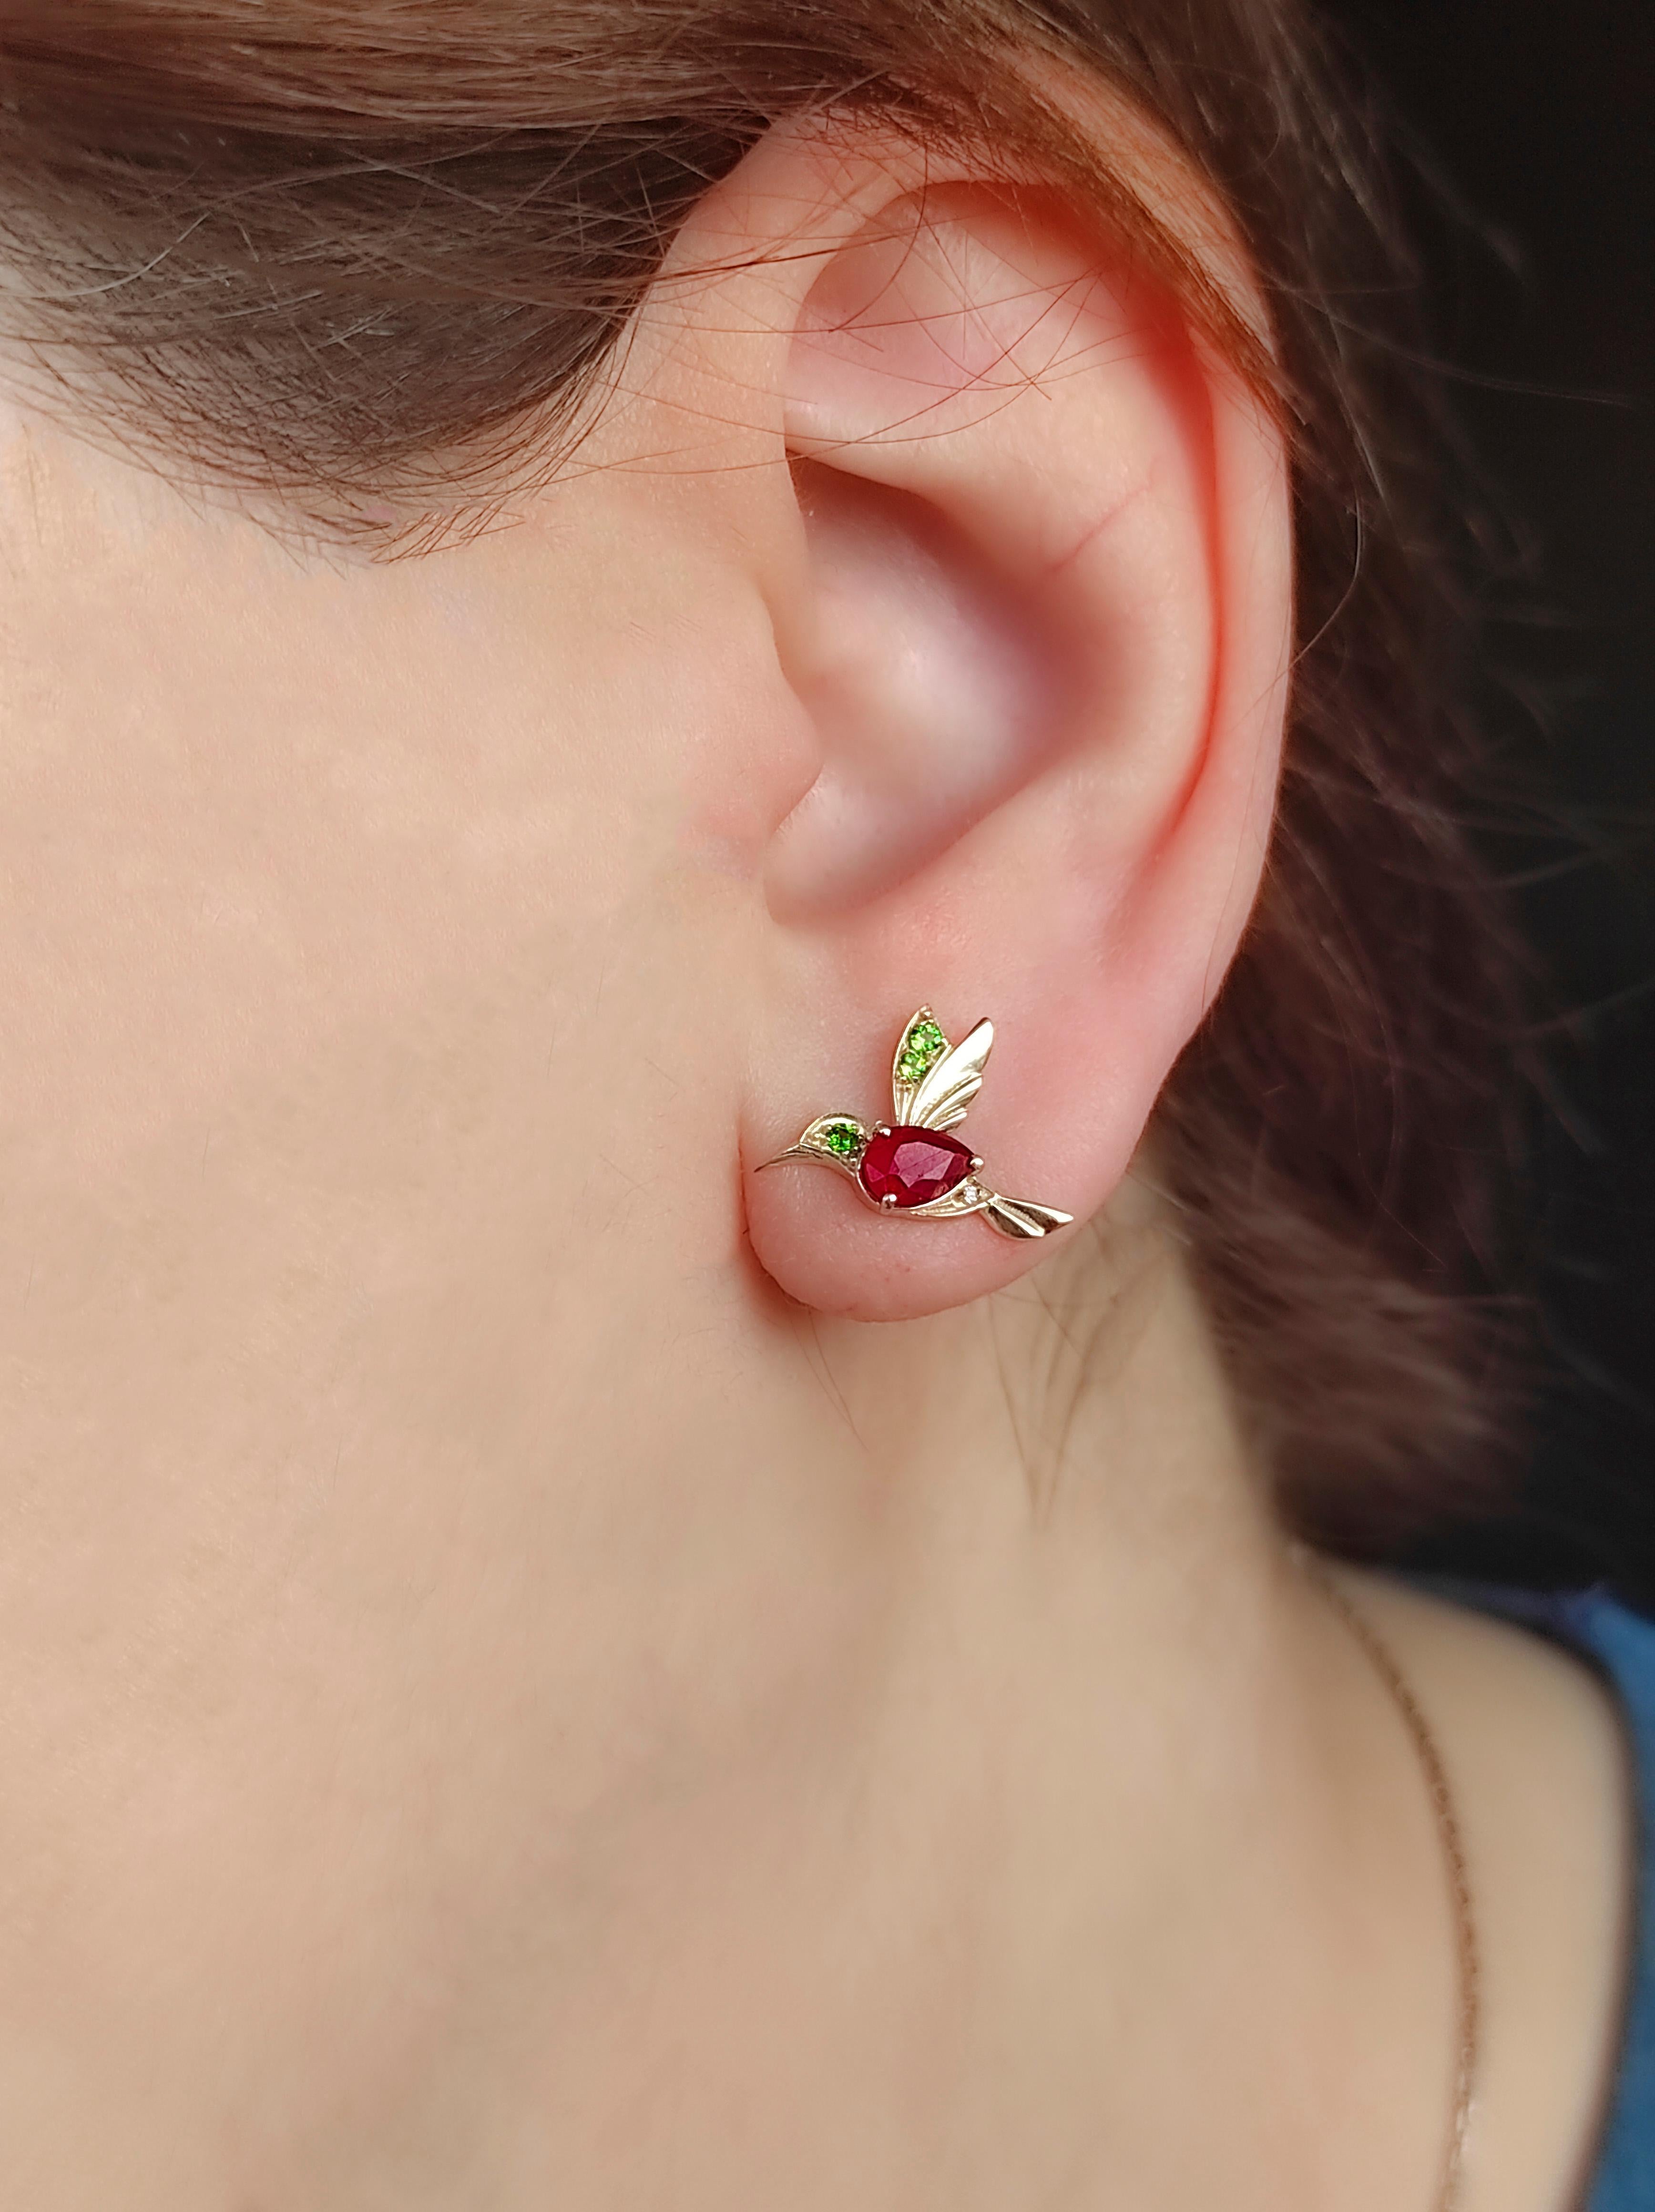 14k Gold Hummingbird Earings Studs with Rubies, Bird Stud Earrings with Gems ! For Sale 6